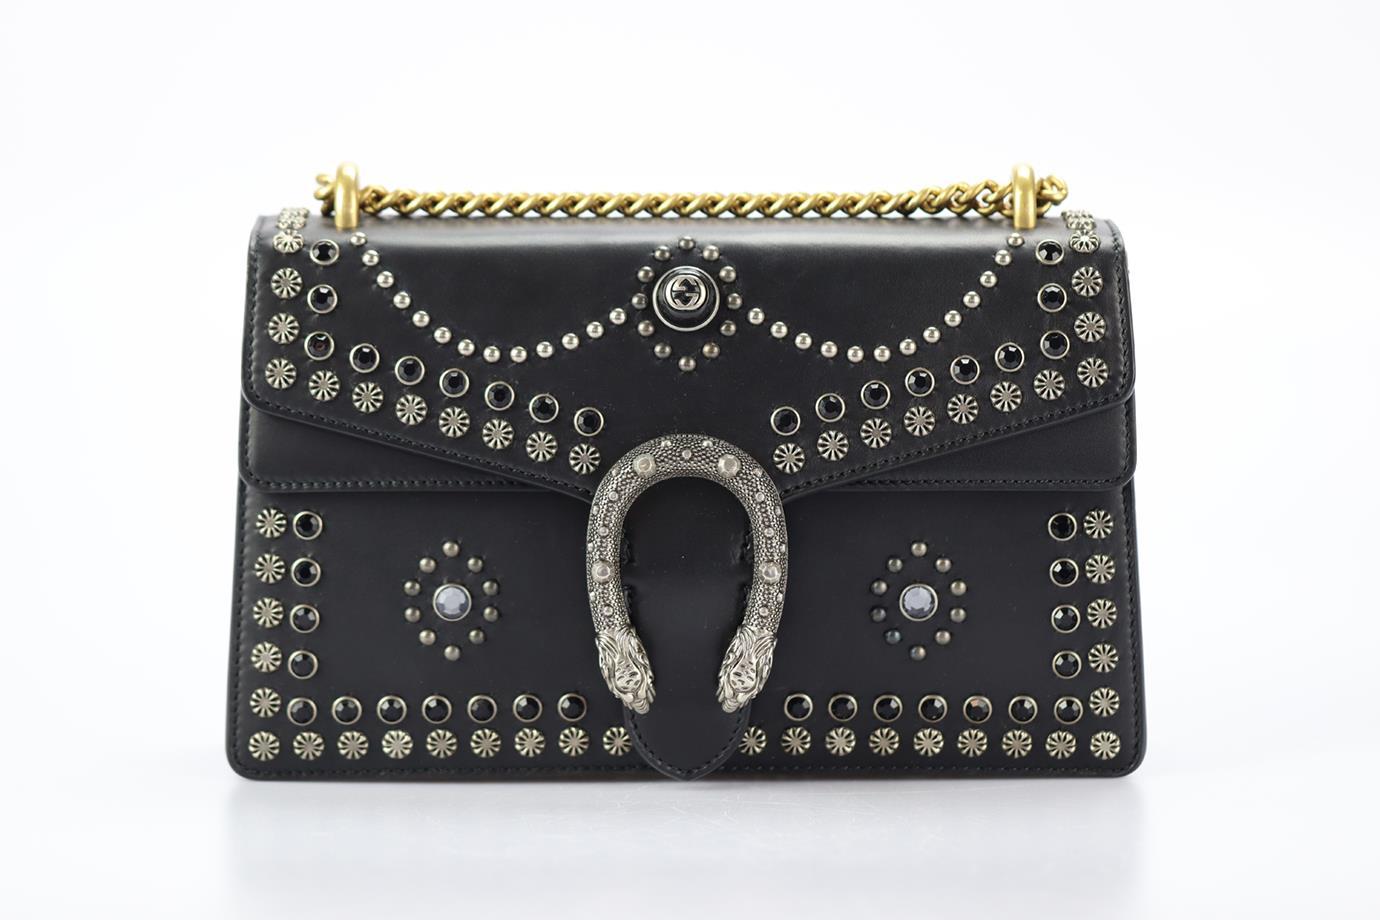 Gucci Dionysus Small Studded Leather Shoulder Bag. Black. Clasp fastening - Front. Comes with - dustbag. Height: 6.6 in. Width: 10.9 in. Depth: 2.7 in. Handle drop: 13.6 in. Condition: Used. Very good condition - Few light scuff marks and